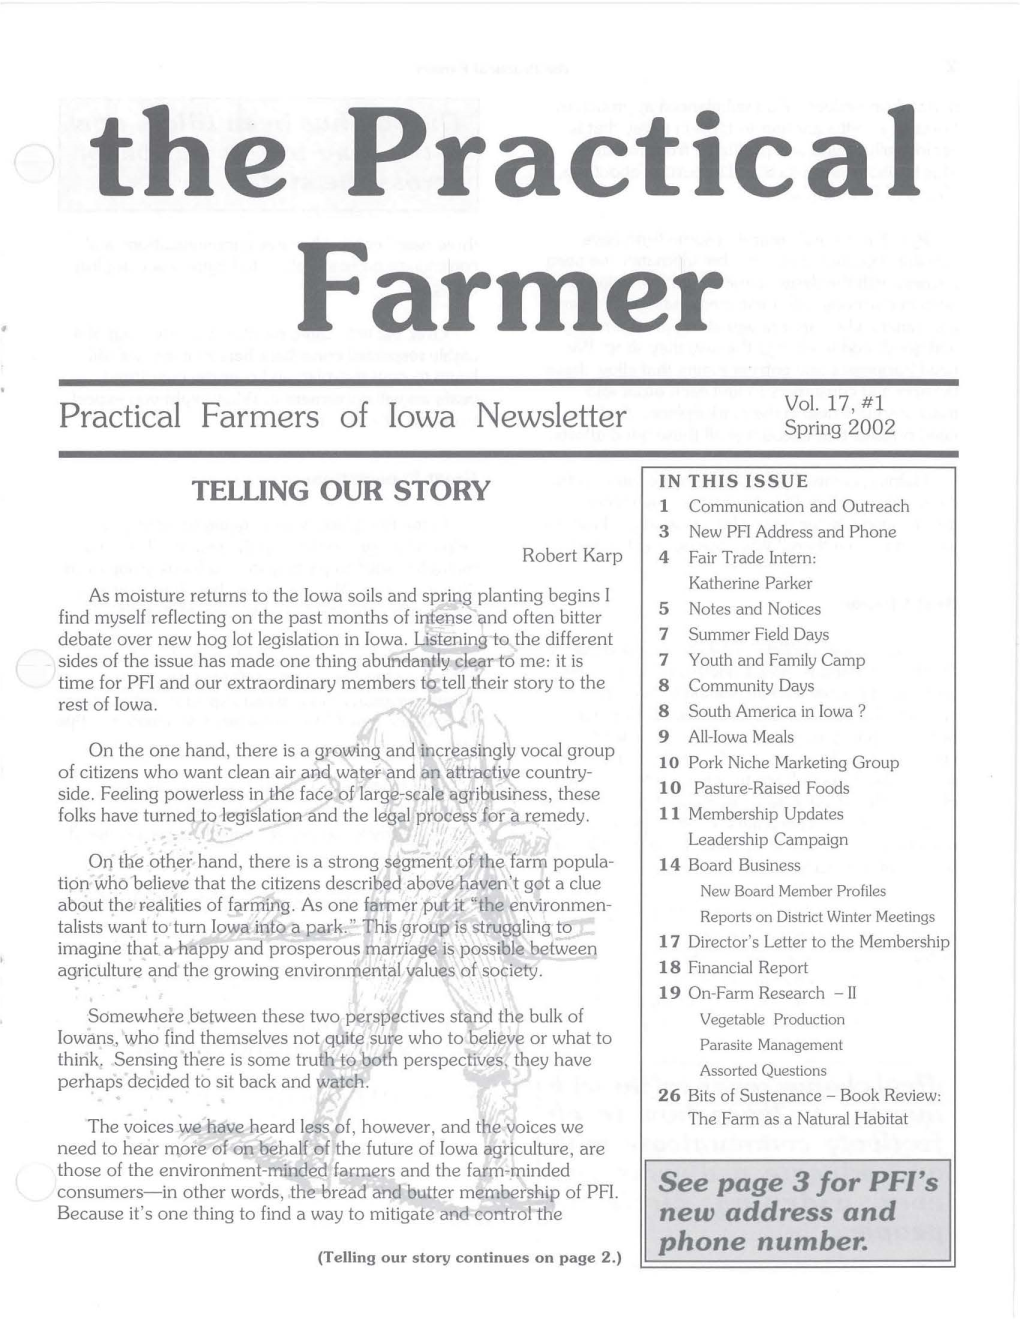 Practical Farmers of Iowa Newsletter Spring 2002